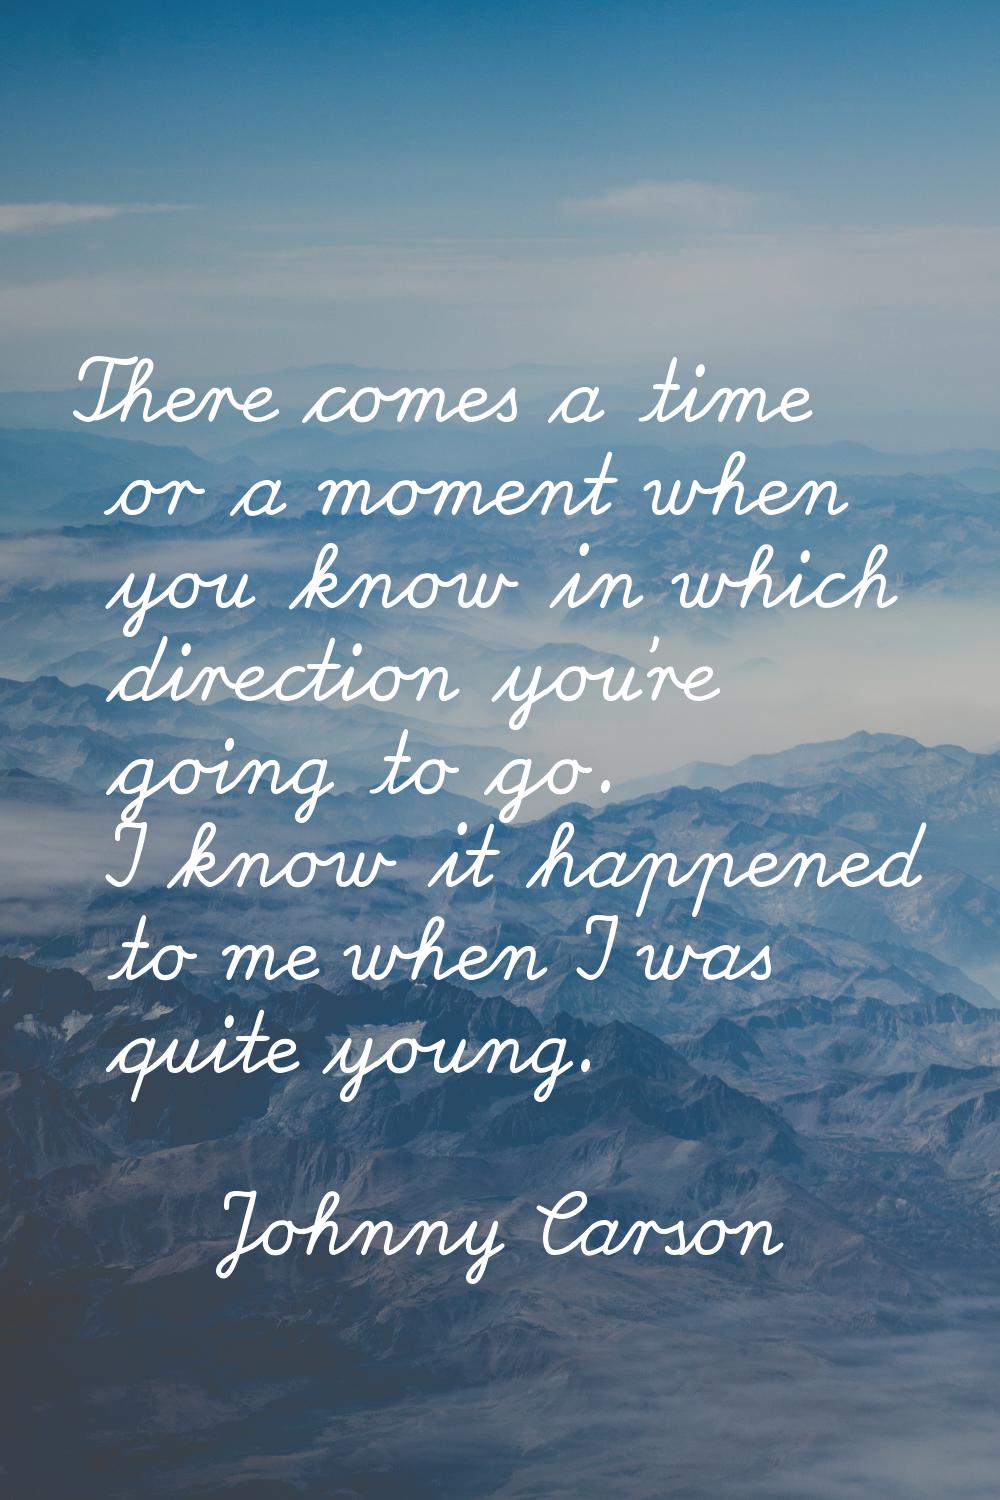 There comes a time or a moment when you know in which direction you're going to go. I know it happe